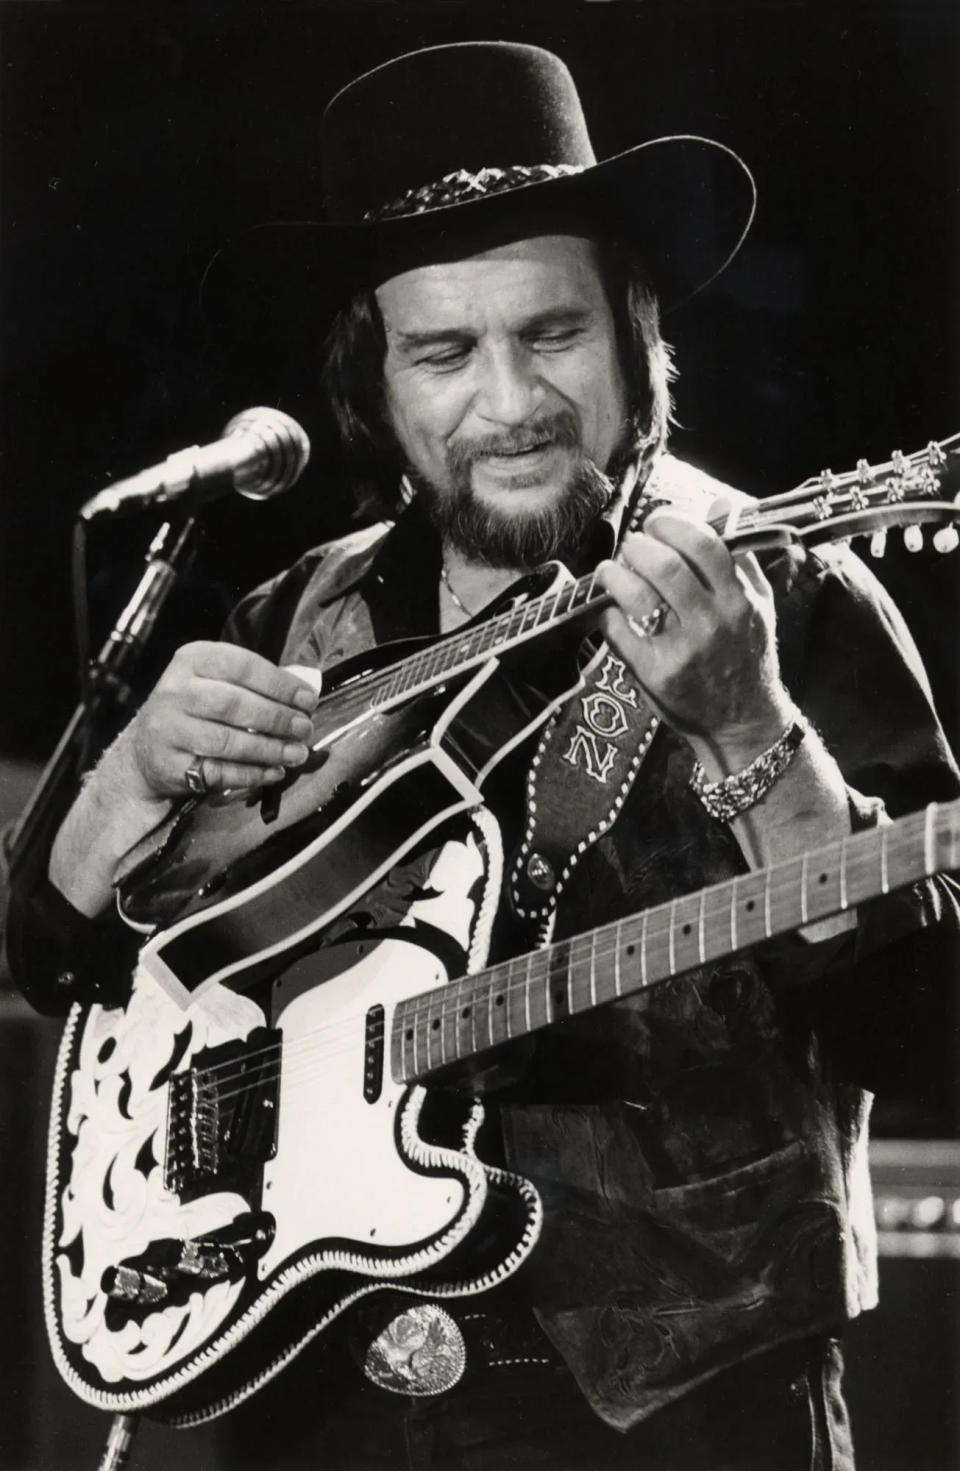 Country music legend Waylon Jennings performs in Nashville, Tenn. in May 1984.